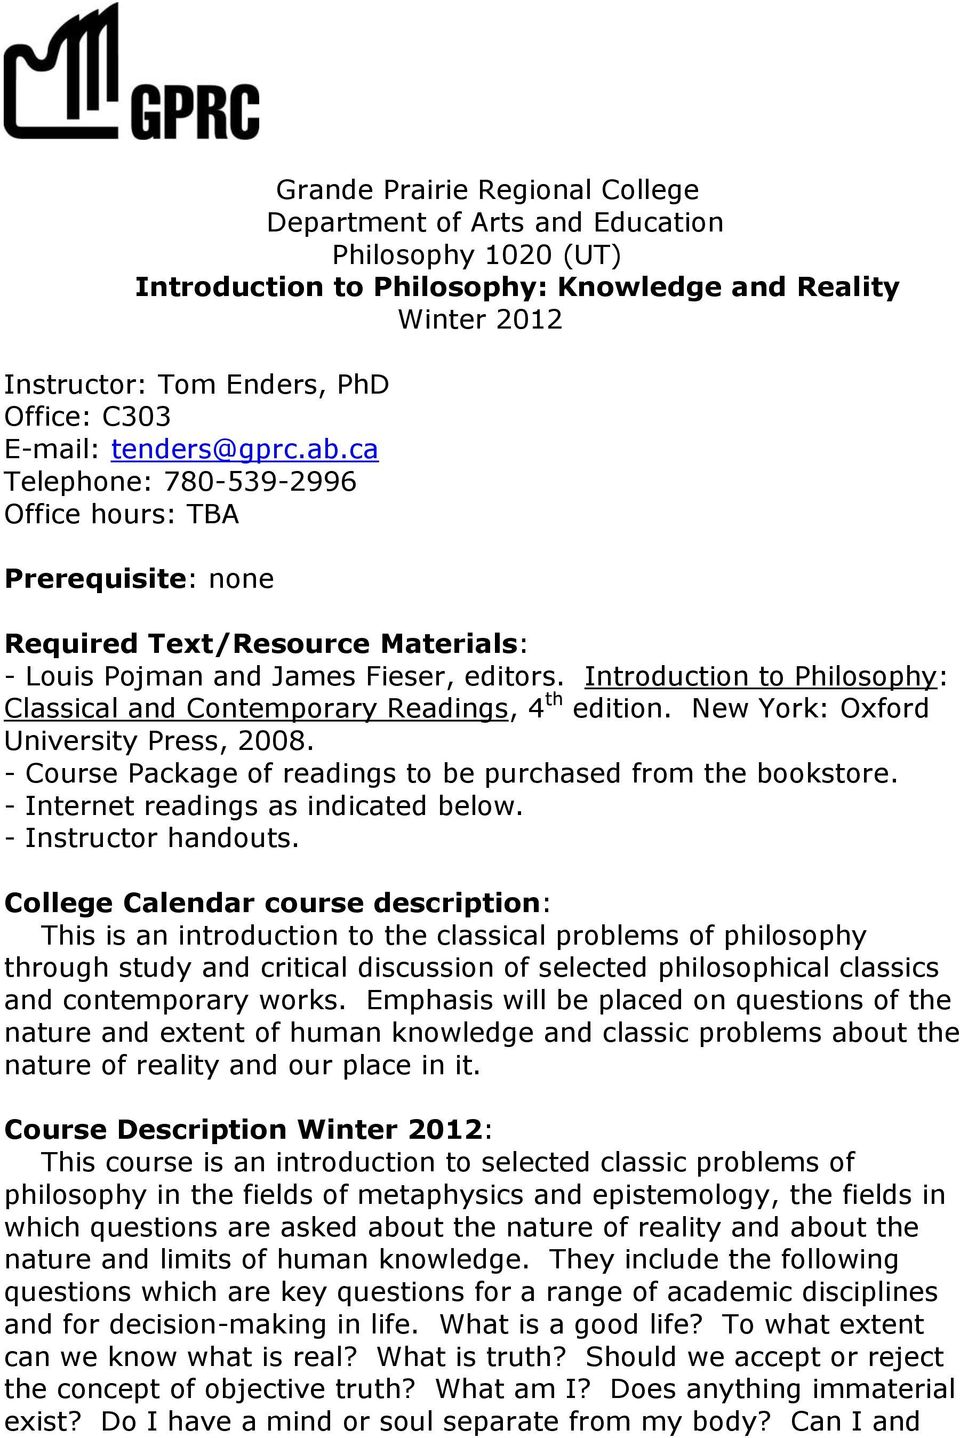 Introduction to Philosophy: Classical and Contemporary Readings, 4 th edition. New York: Oxford University Press, 2008. - Course Package of readings to be purchased from the bookstore.